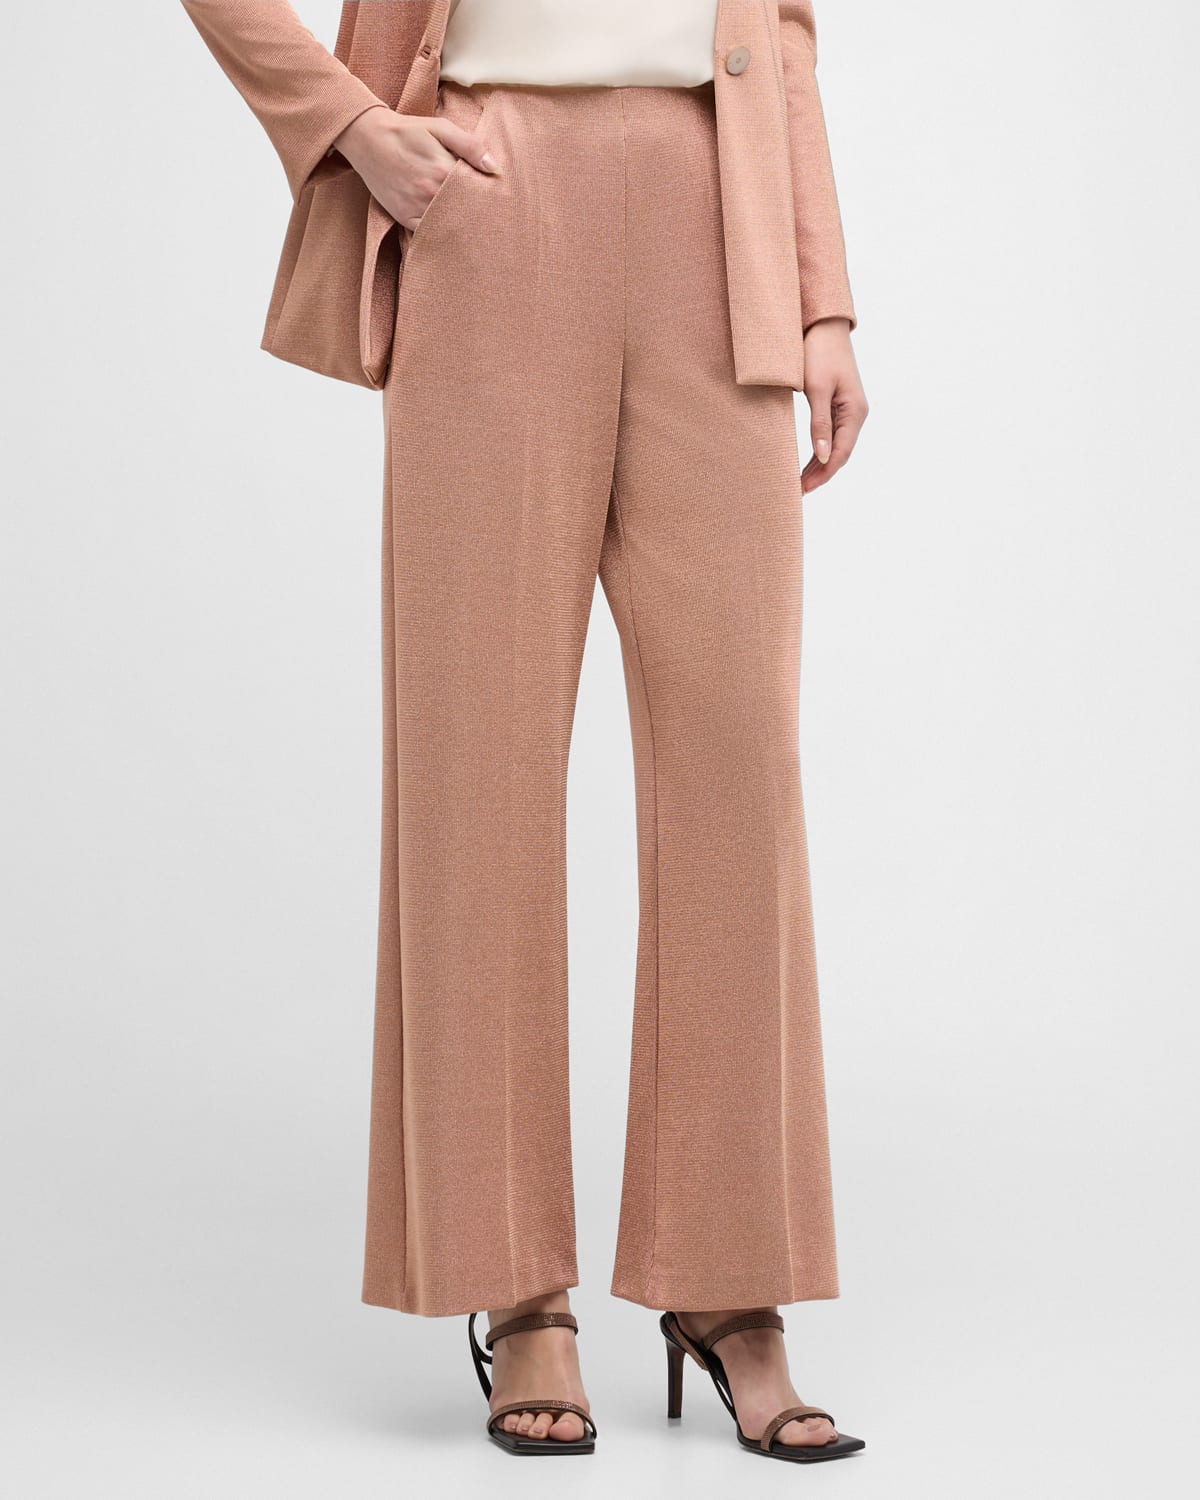 Lurex Bonded Jersey Trousers